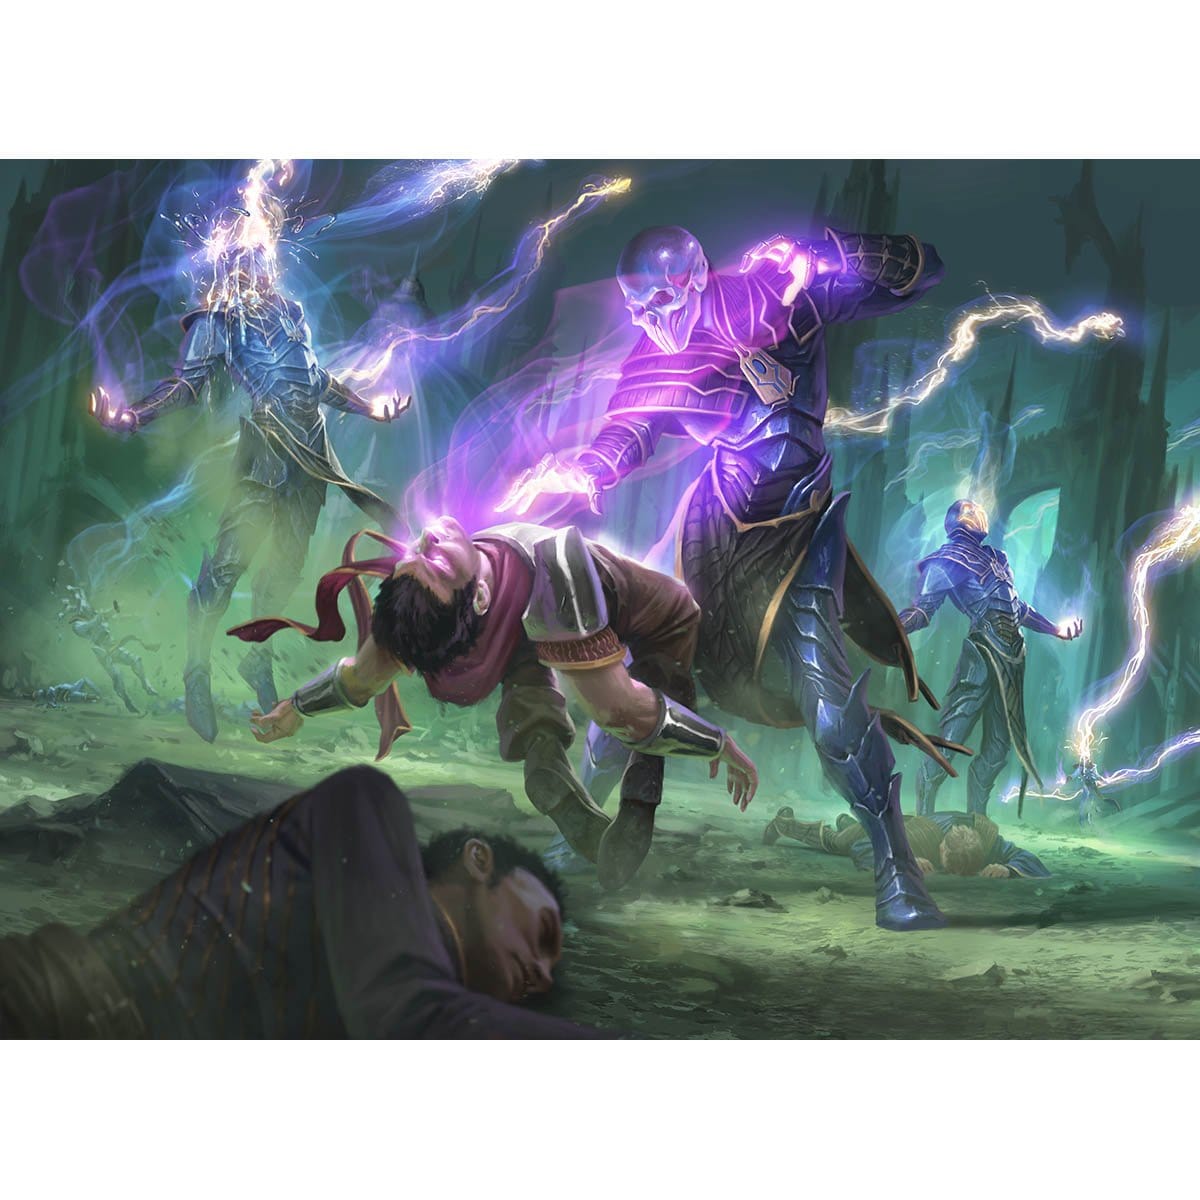 The Elderspell Print - Print - Original Magic Art - Accessories for Magic the Gathering and other card games